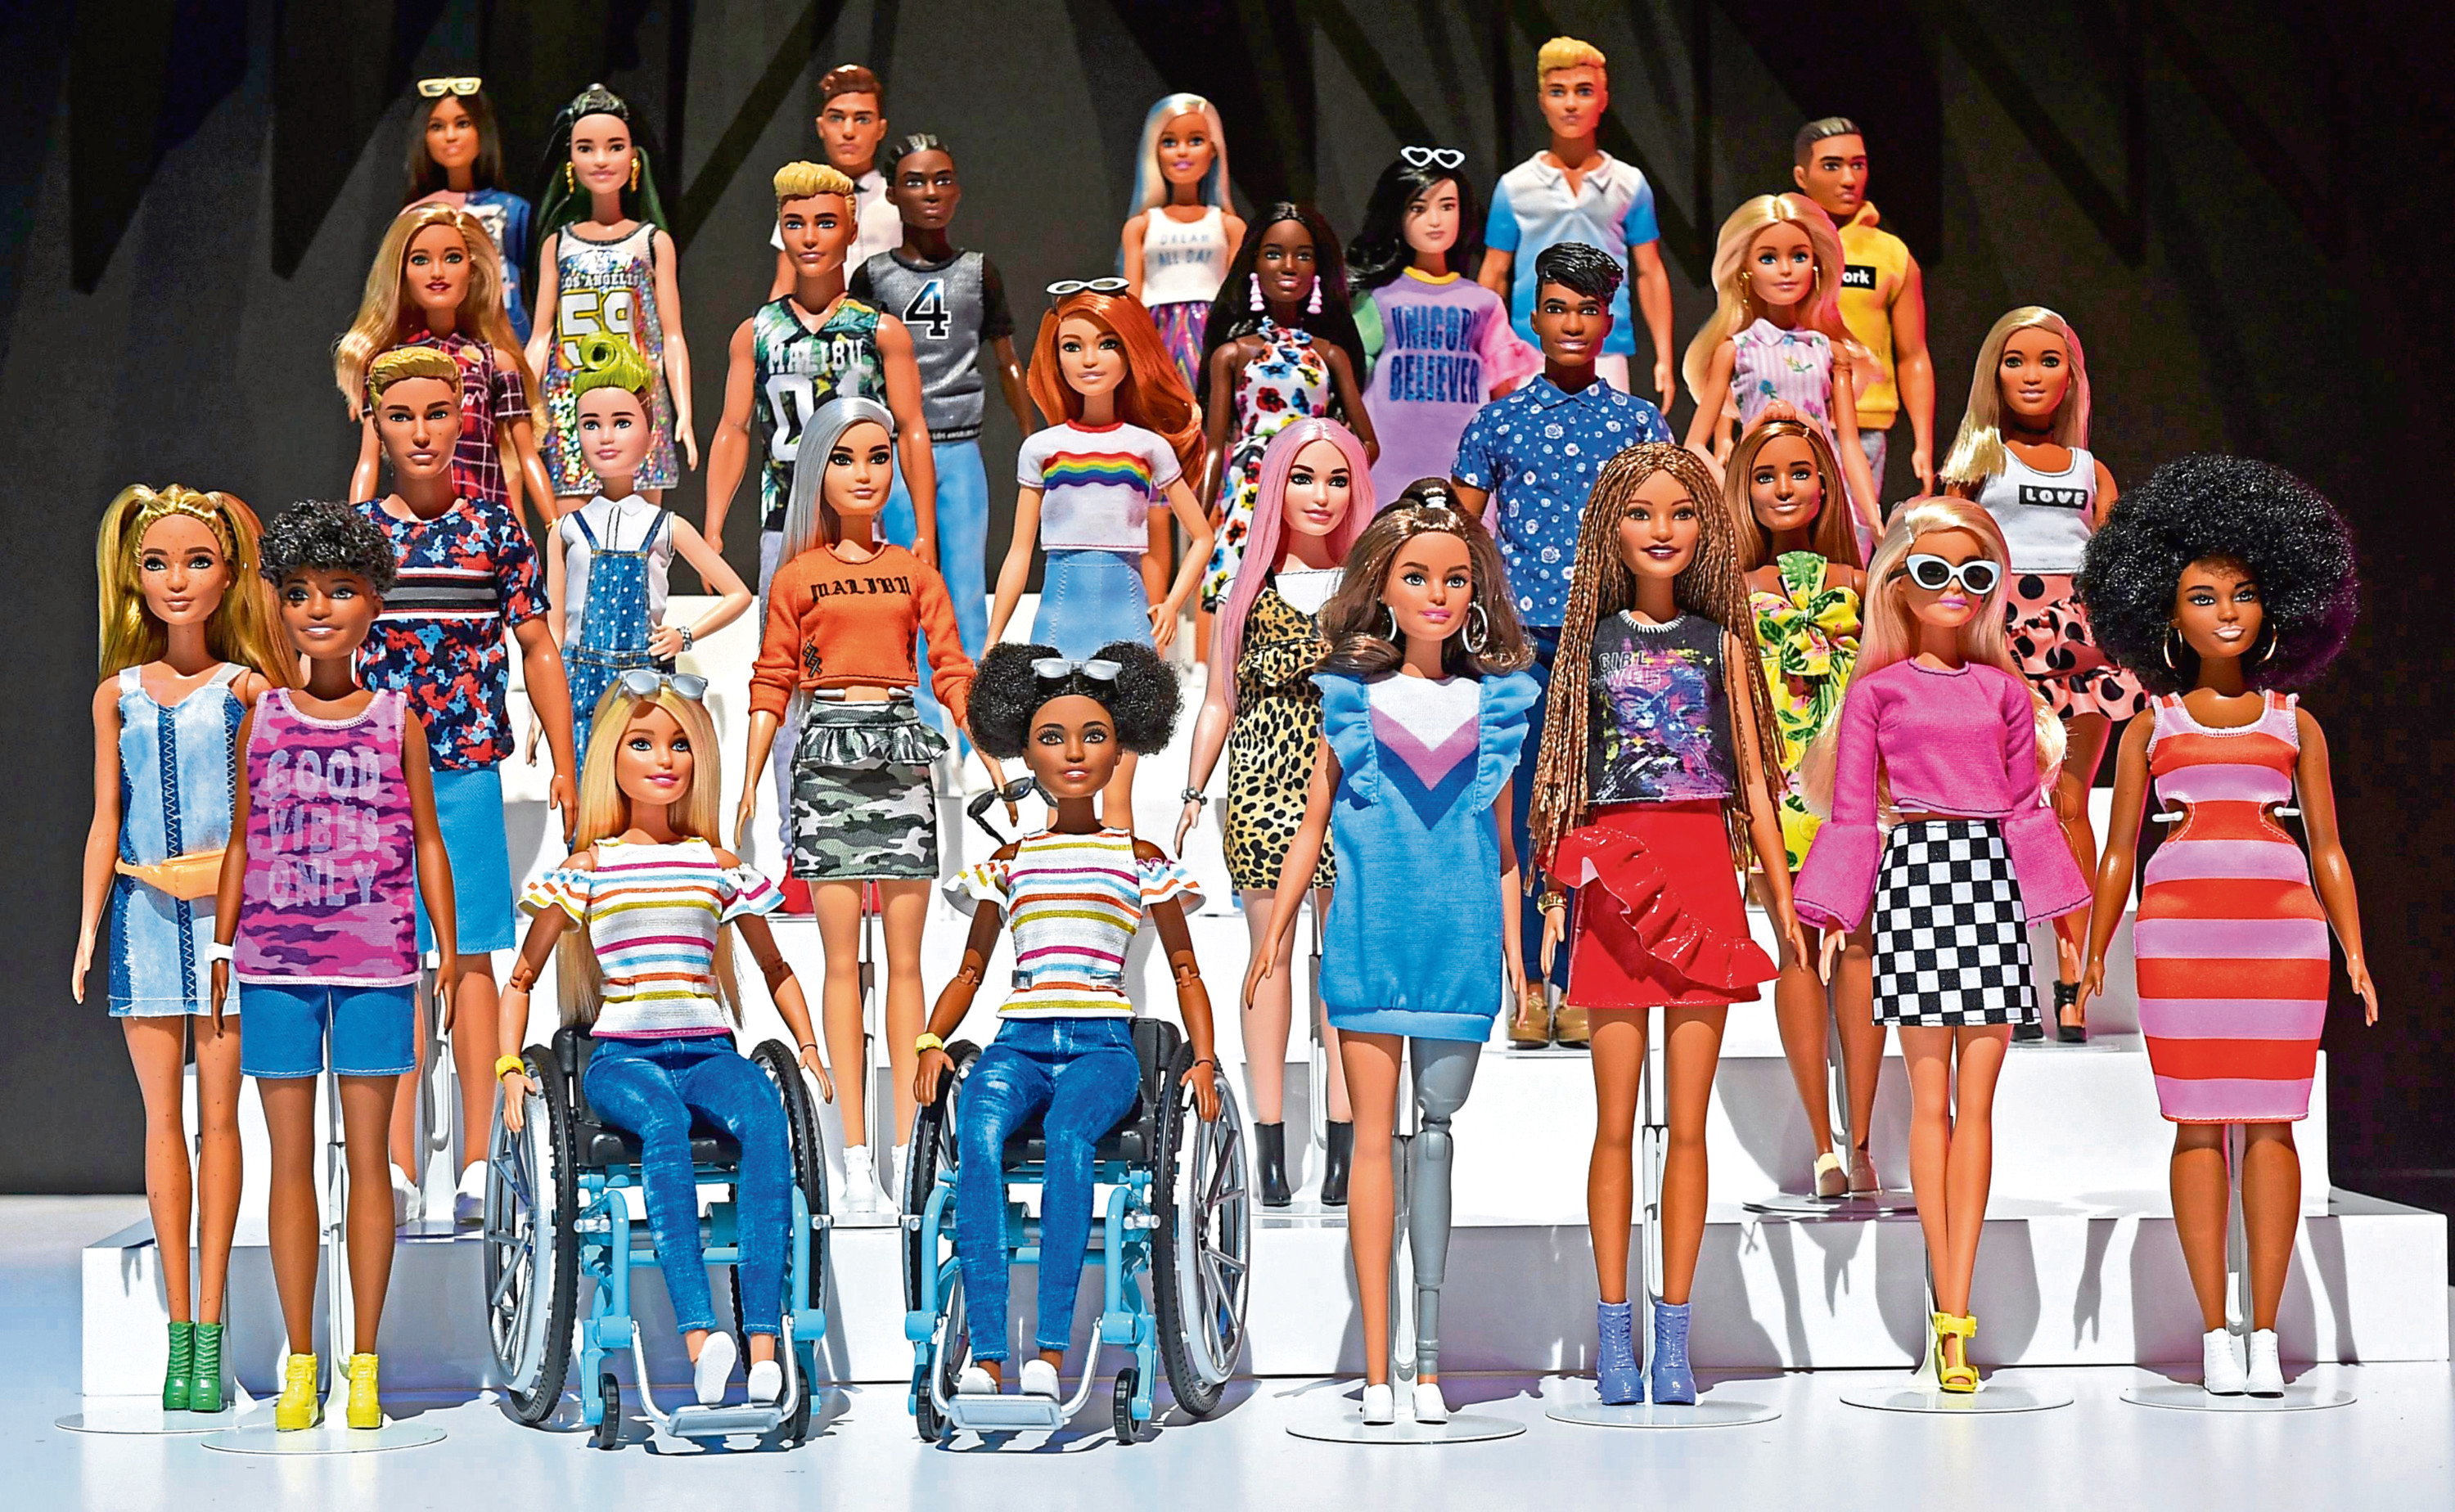 The 2019 Barbie collection features dolls in wheelchairs and with a prosthetic limb